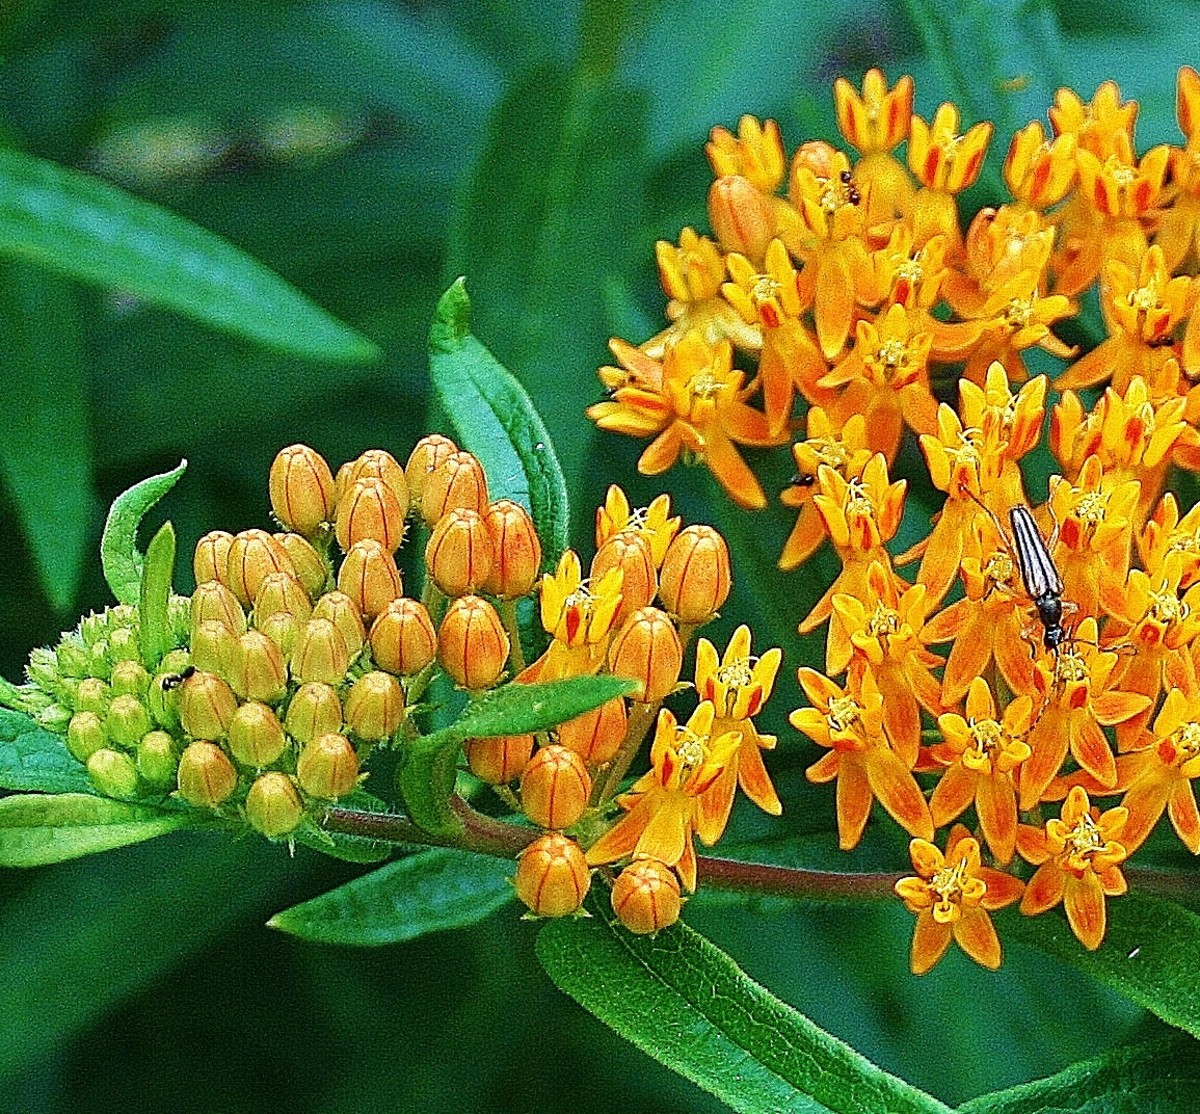 As the flower heads of butterfly weed open, the intensity of its small orange flowers increase in intensity.